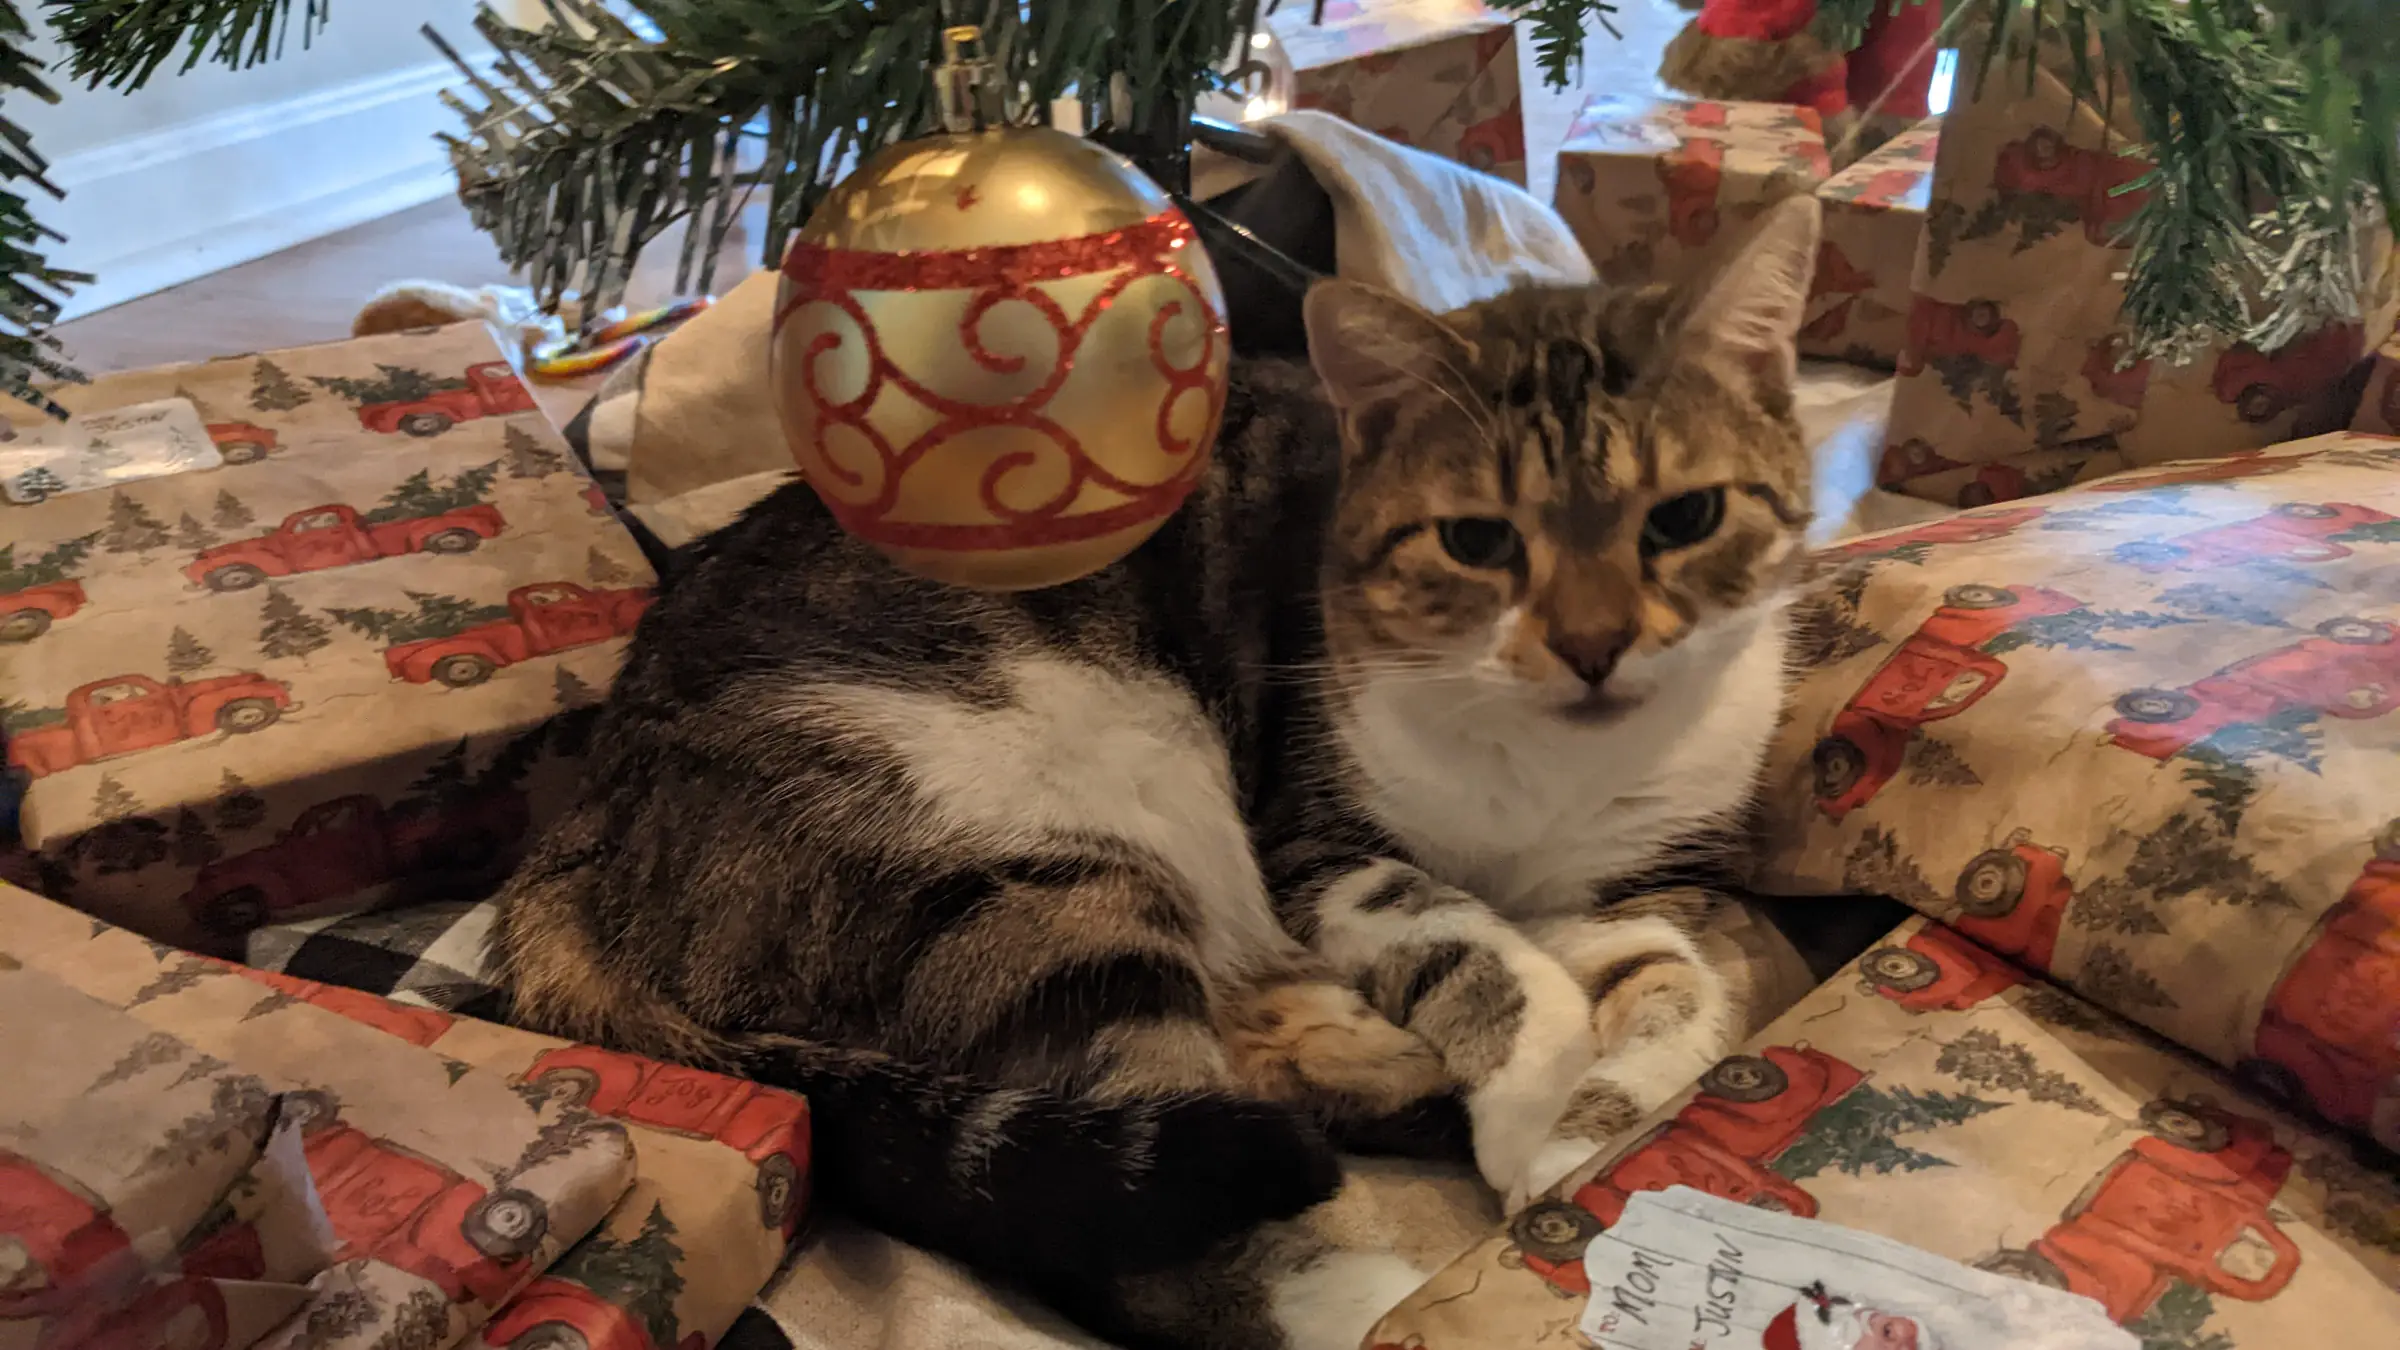 Bottom of Christmas tree with a cat lying on the tree skirt, surrounded by gifts.